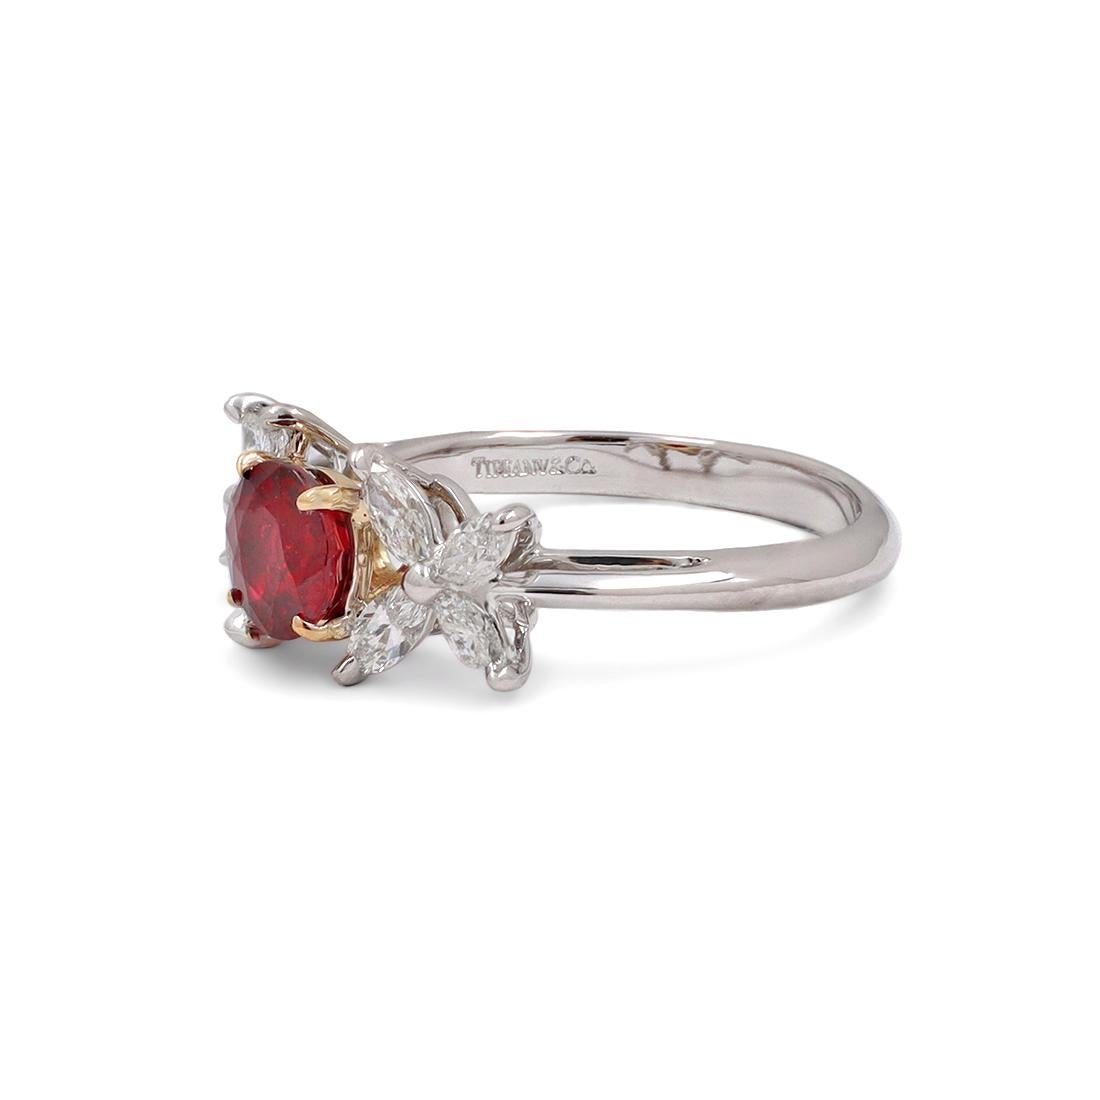 Authentic Tiffany & Co. 'Victoria' ring crafted in platinum and 18 karat yellow gold. This exquisite ring is set with two sparking marquise-shaped diamonds estimated at 0.60 carat total weight and one round brilliant cut ruby estimated 0.43 carat